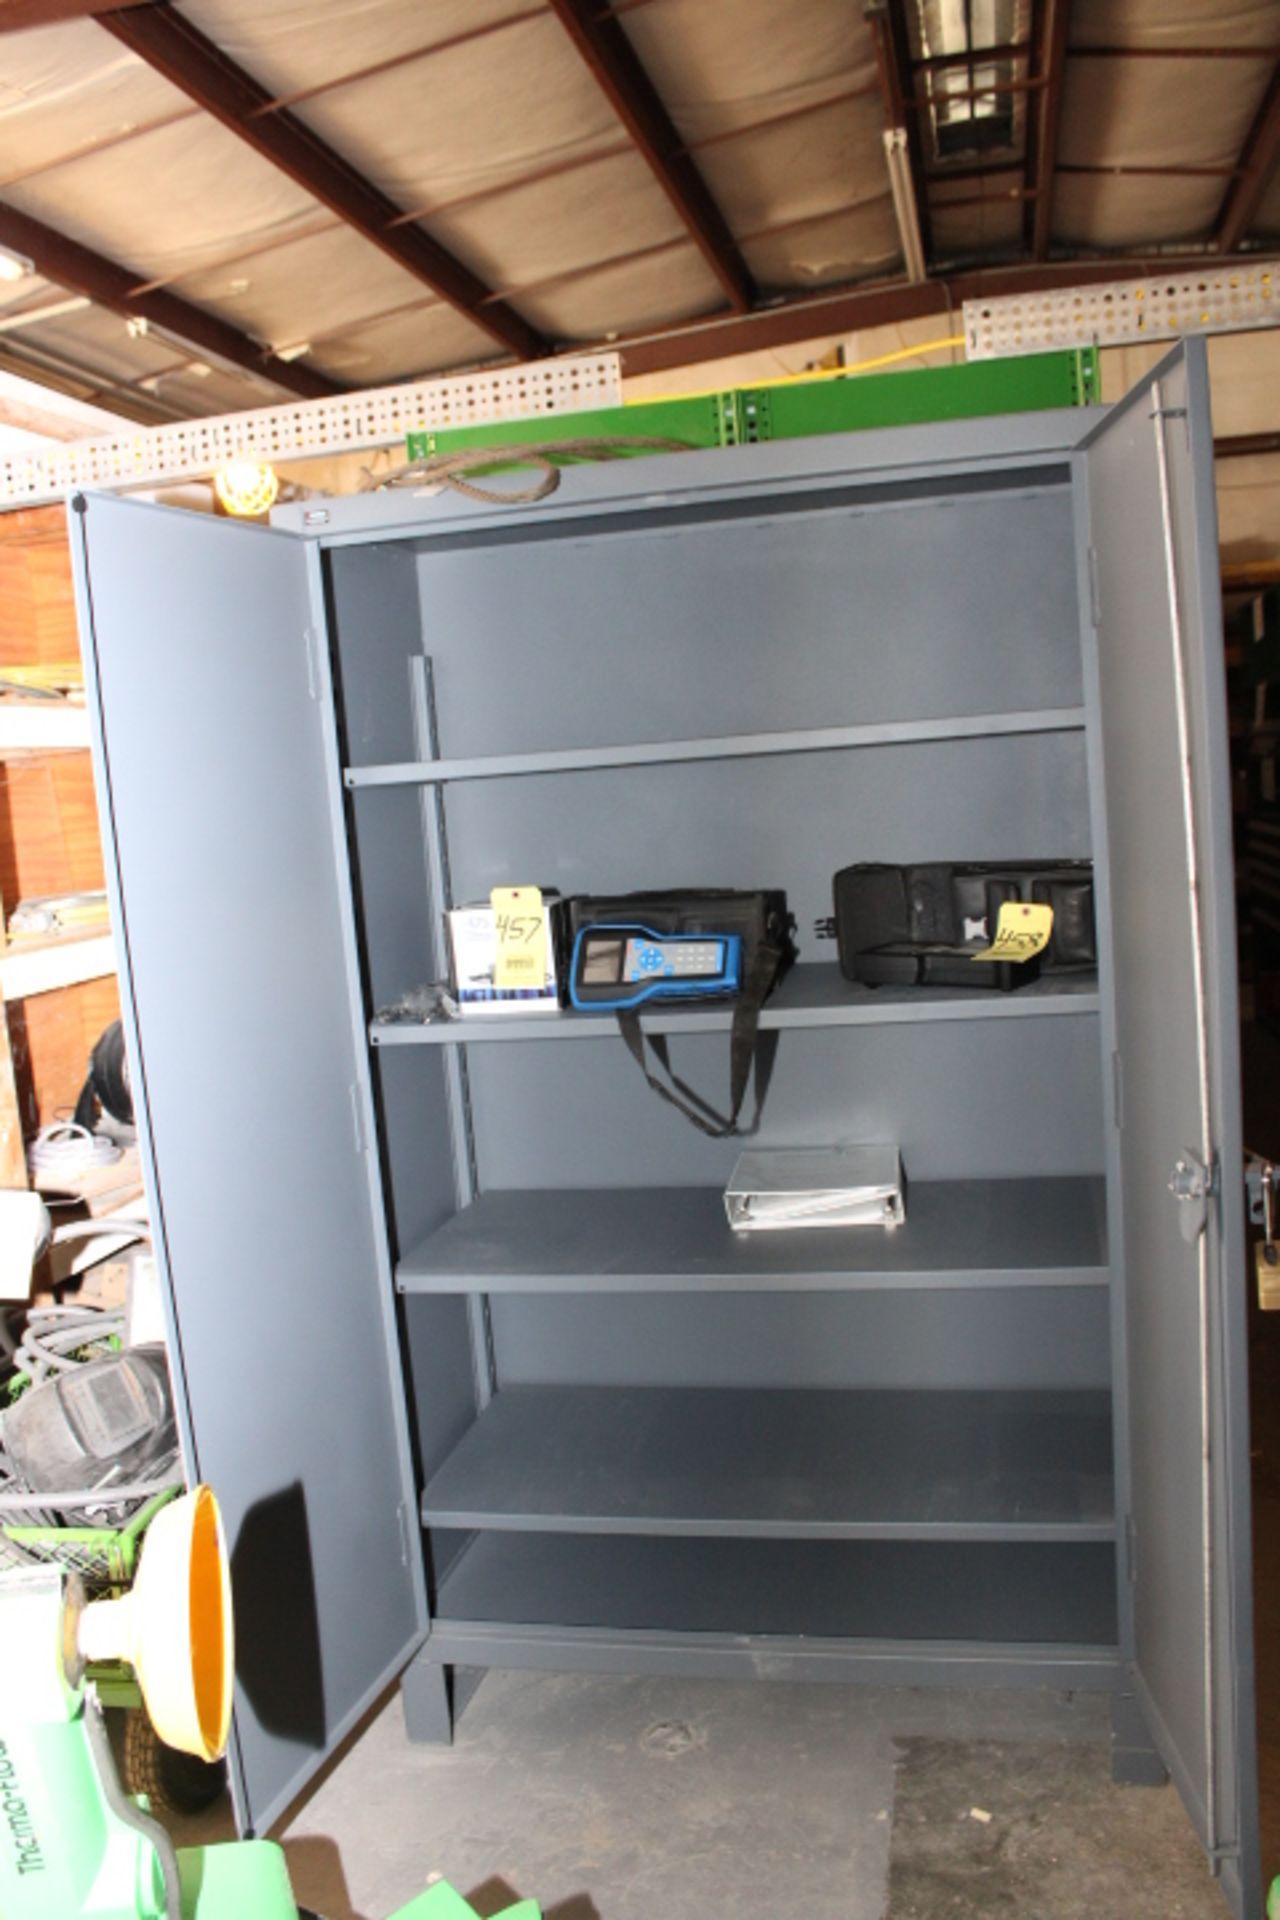 STORAGE CABINET, GLOBAL, H.D., 48"W. x 78" ht. x 24" dp, (4) shelves (delayed removal) (contents not - Image 3 of 3